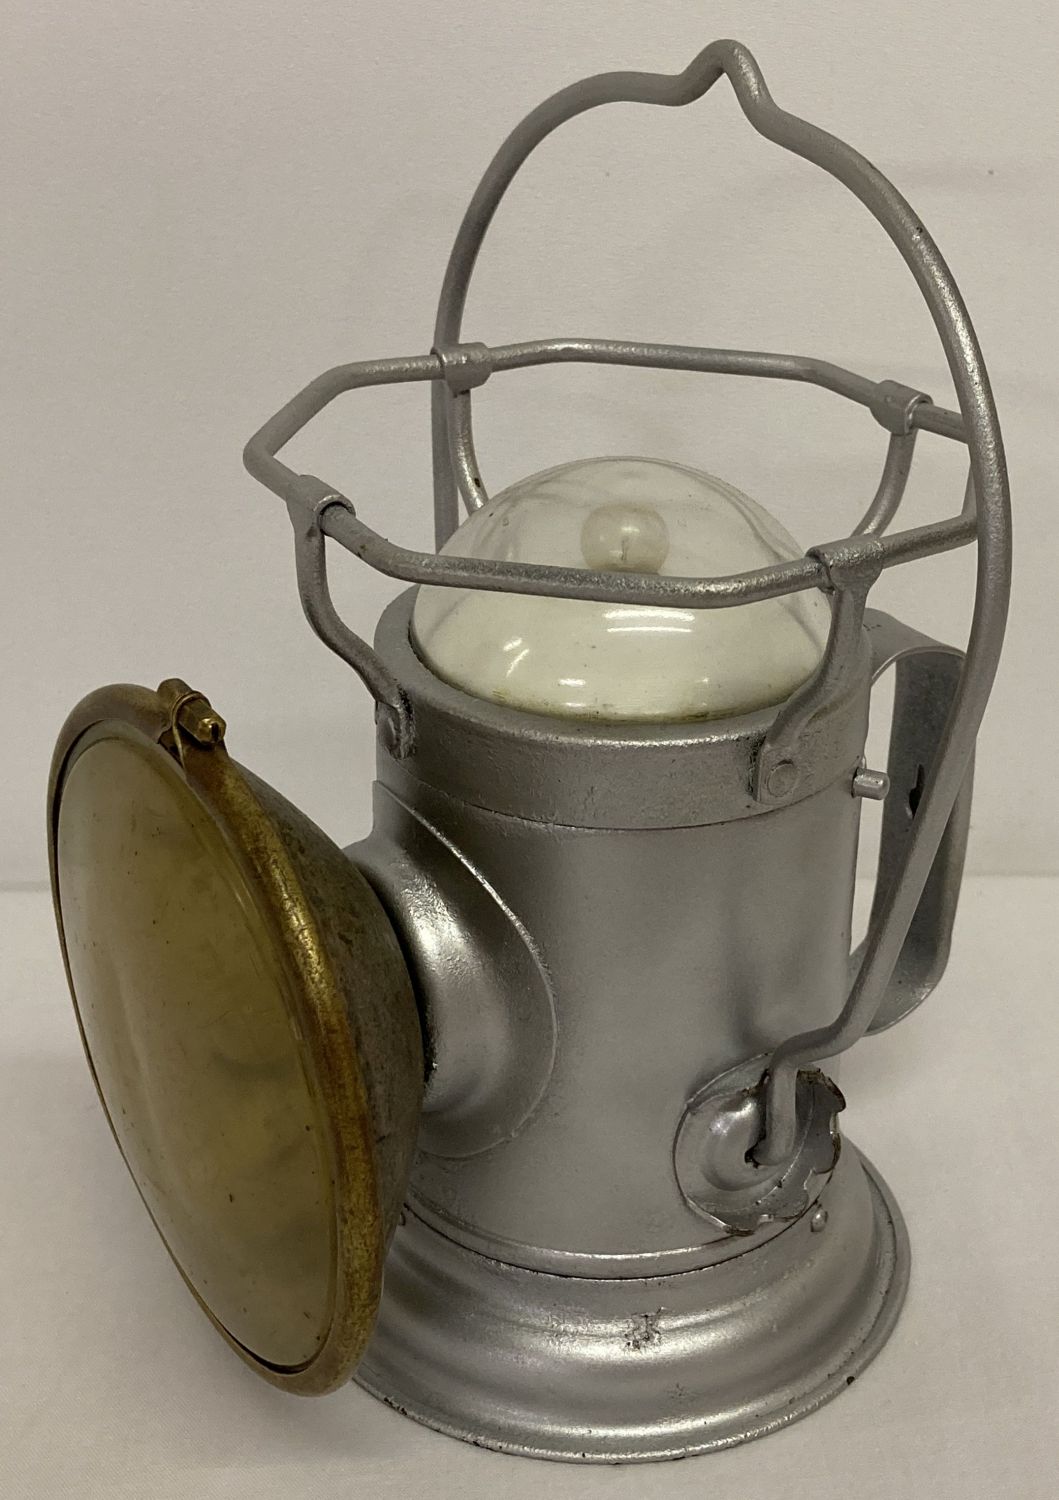 A vintage Mariol Powerlite Lantern by the Mariol Electric Company, Indiana, America.